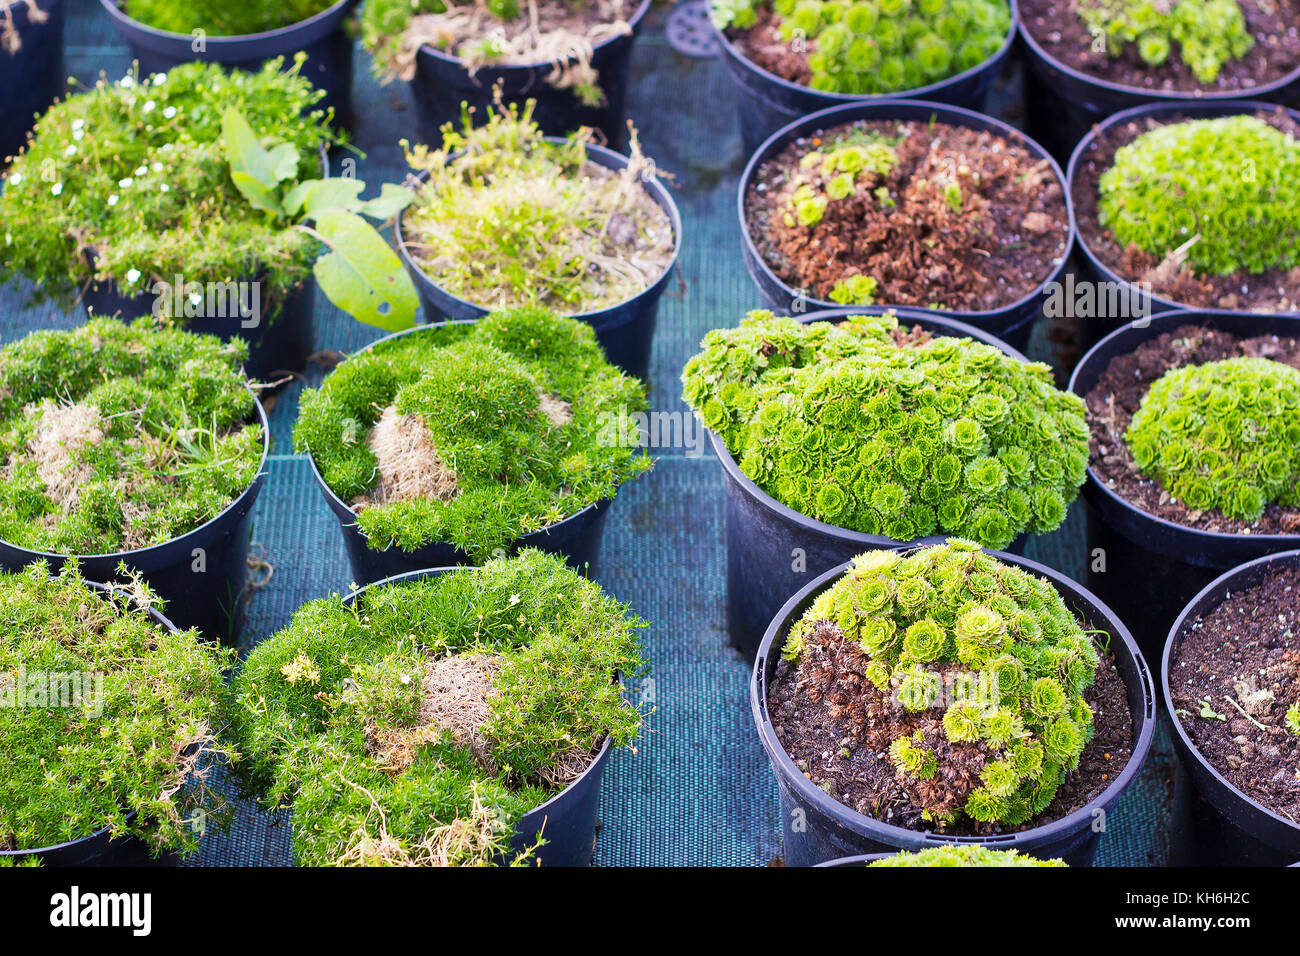 Sagina blooming plants and Saxifraga plants and in black pots for sale at garden center Stock Photo